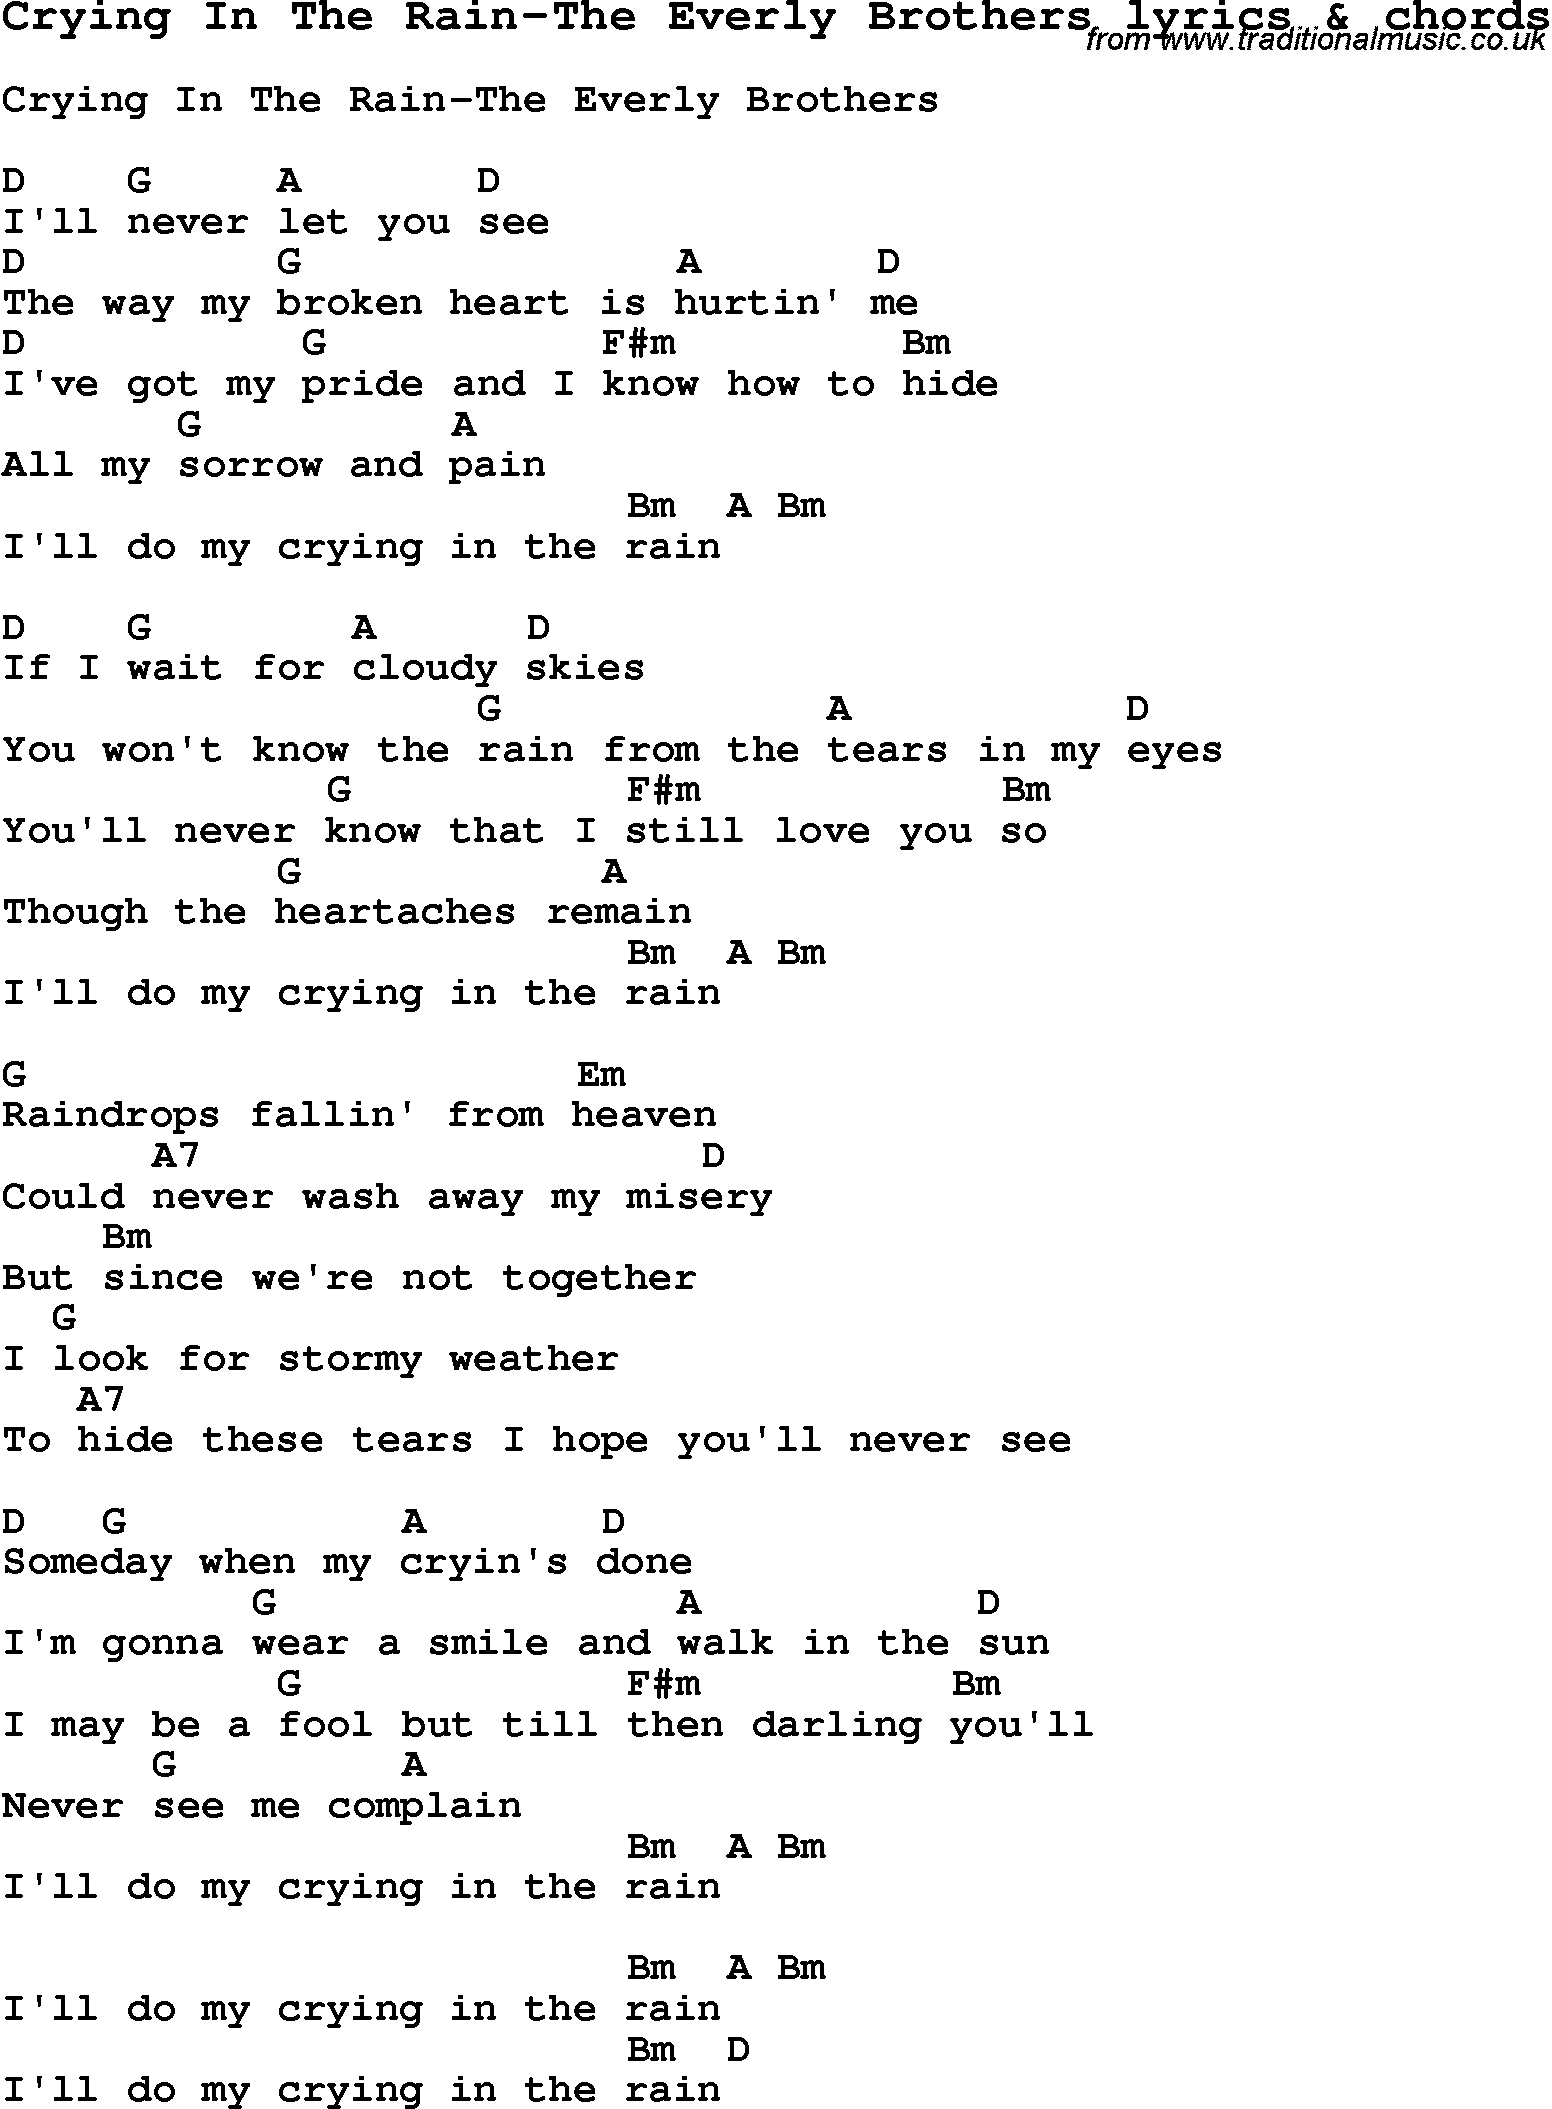 Love Song Lyrics For Crying In The Rain The Everly Brothers With Chords